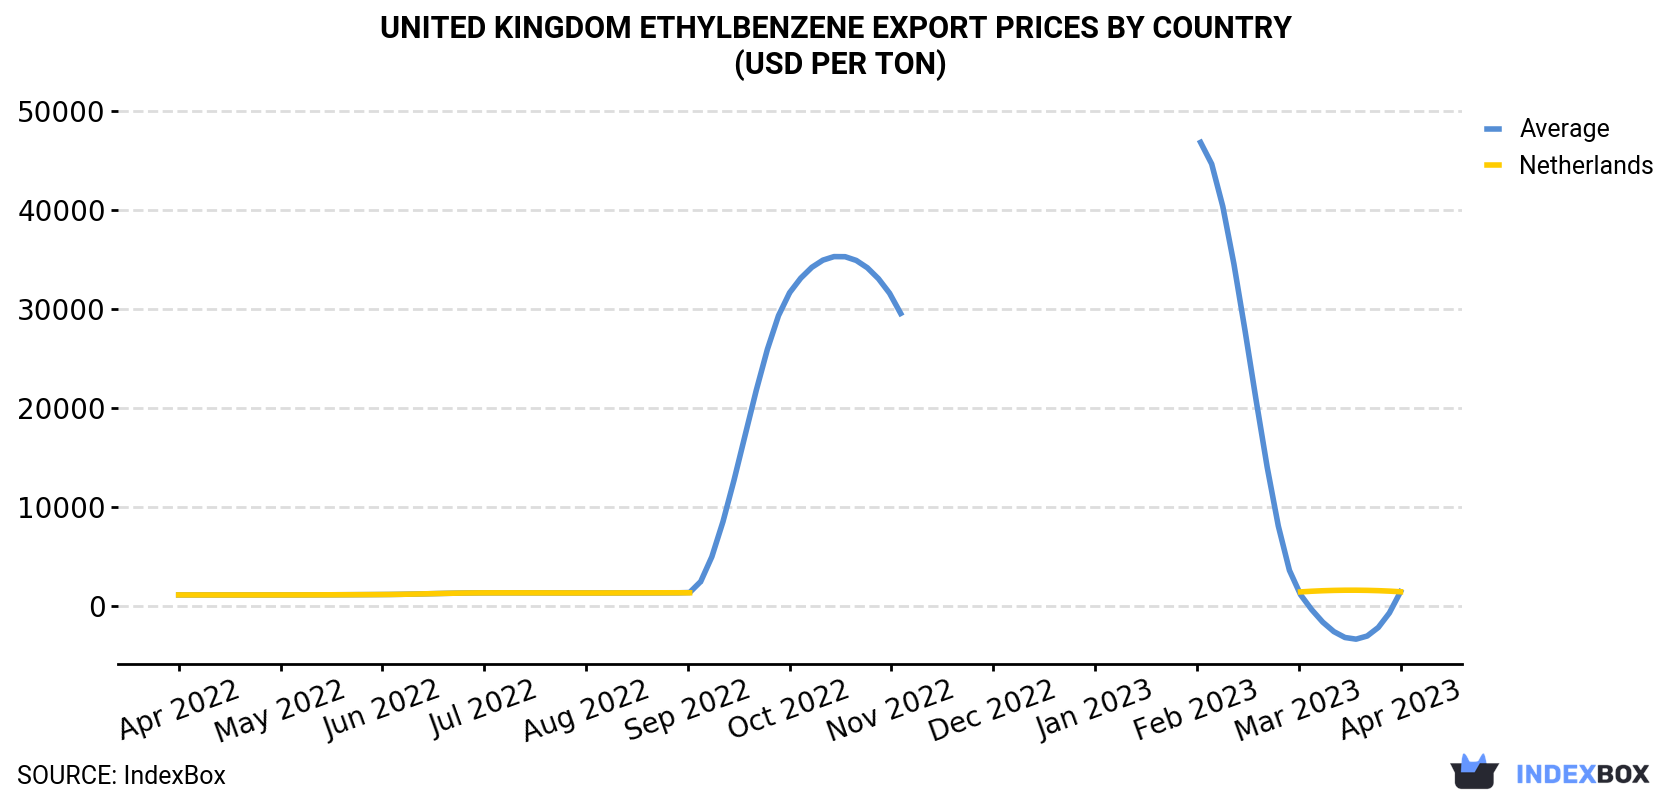 United Kingdom Ethylbenzene Export Prices By Country (USD Per Ton)